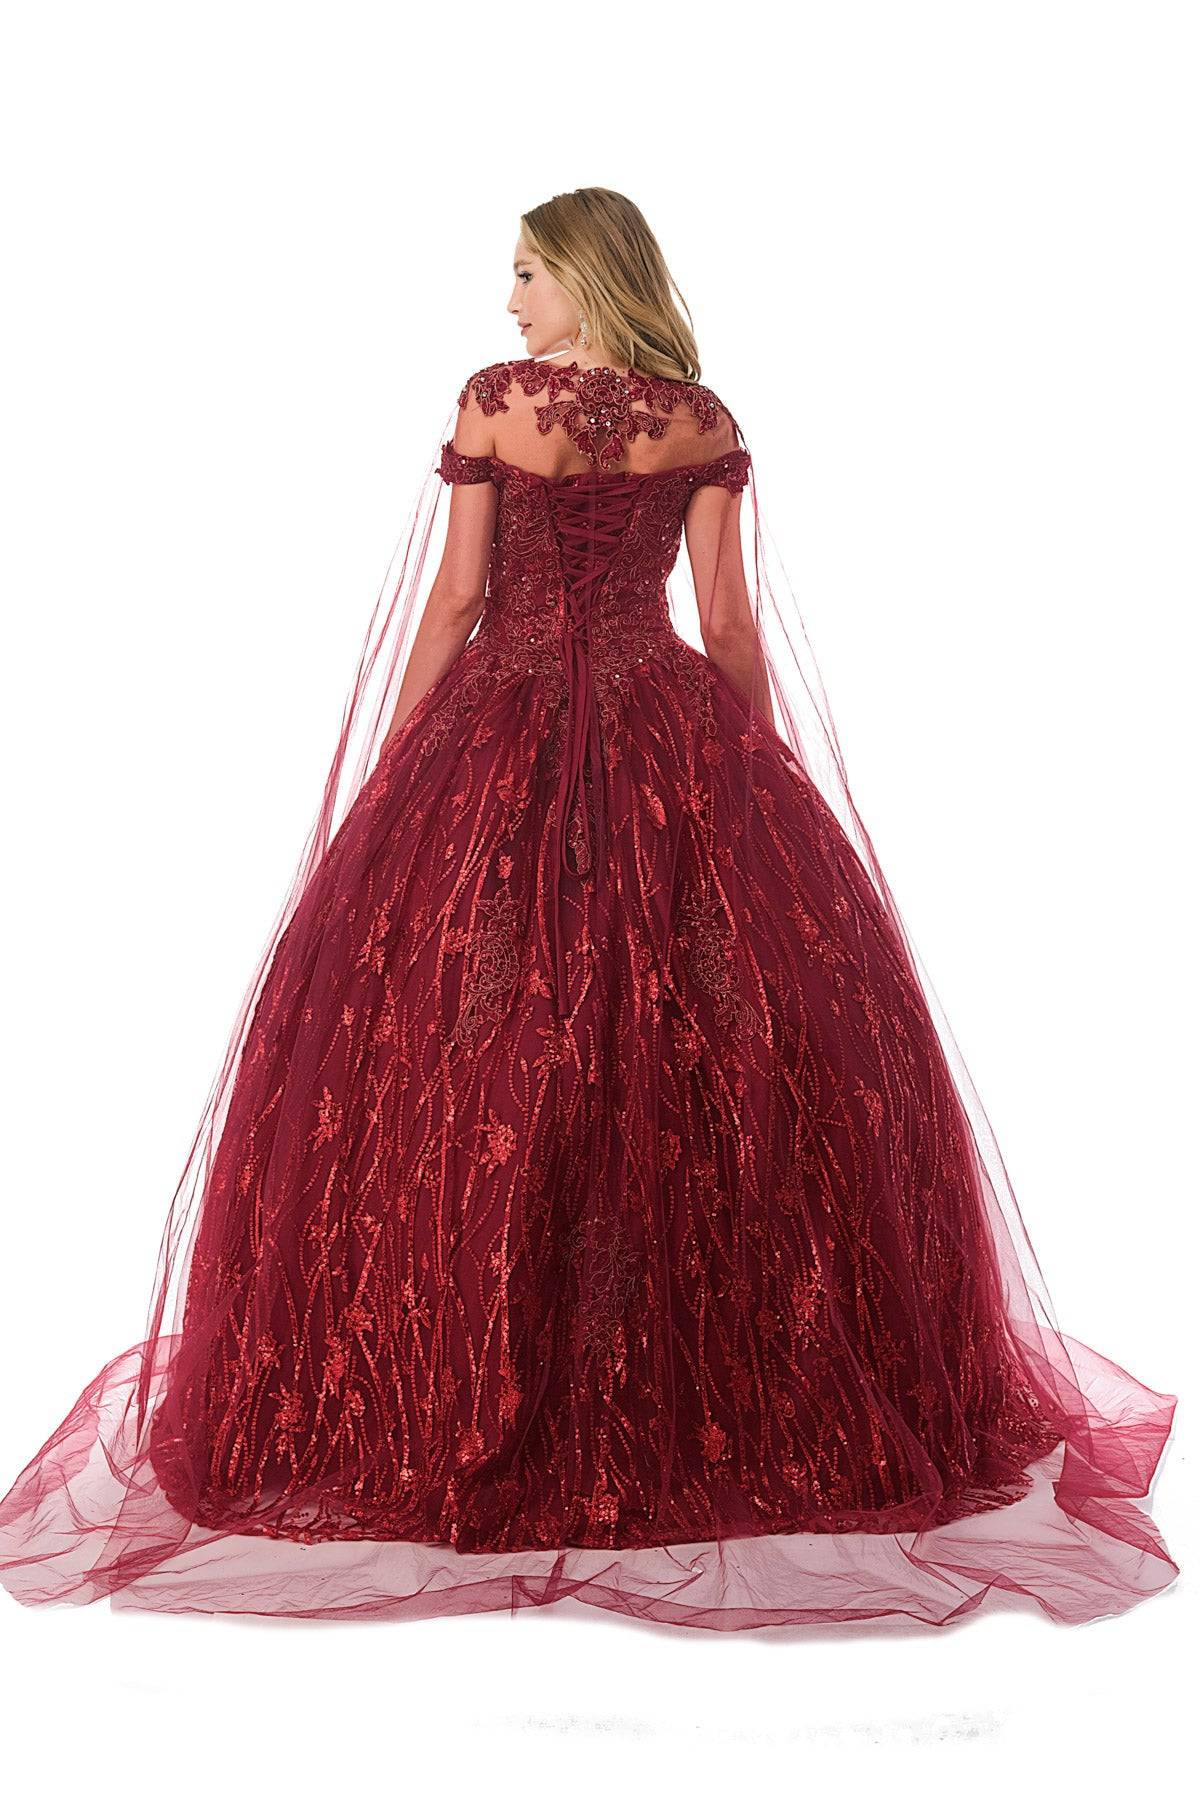 Aspeed L2804C  Floral & Sequin Burgundy Ball Gown | 3 Colors - NORMA REED